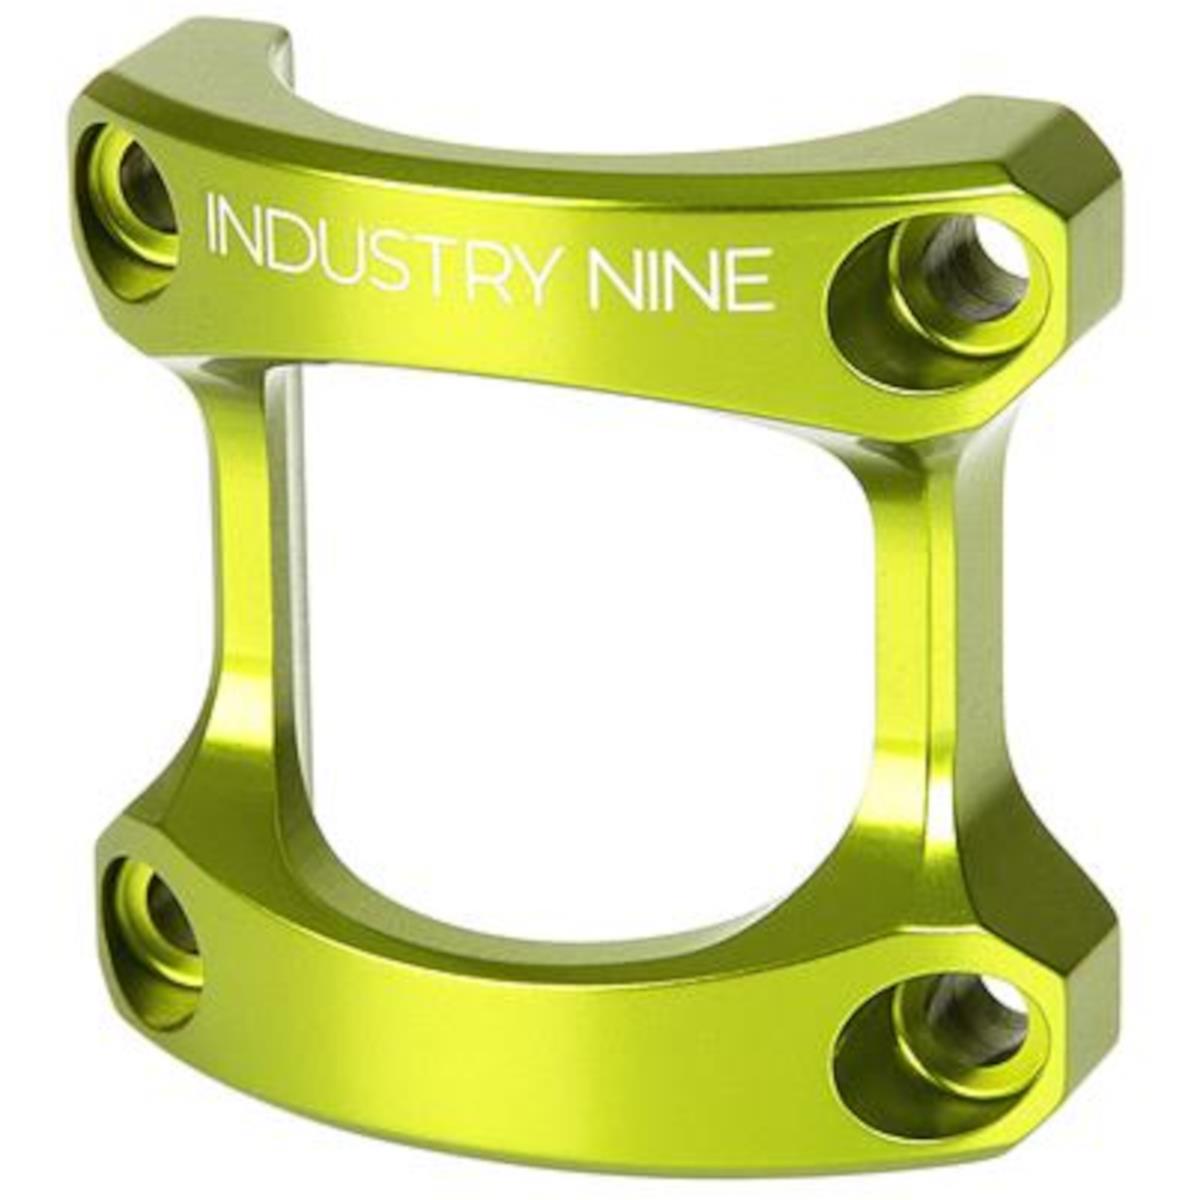 Industry Nine Stem Faceplate  for A35 Stems, Lime